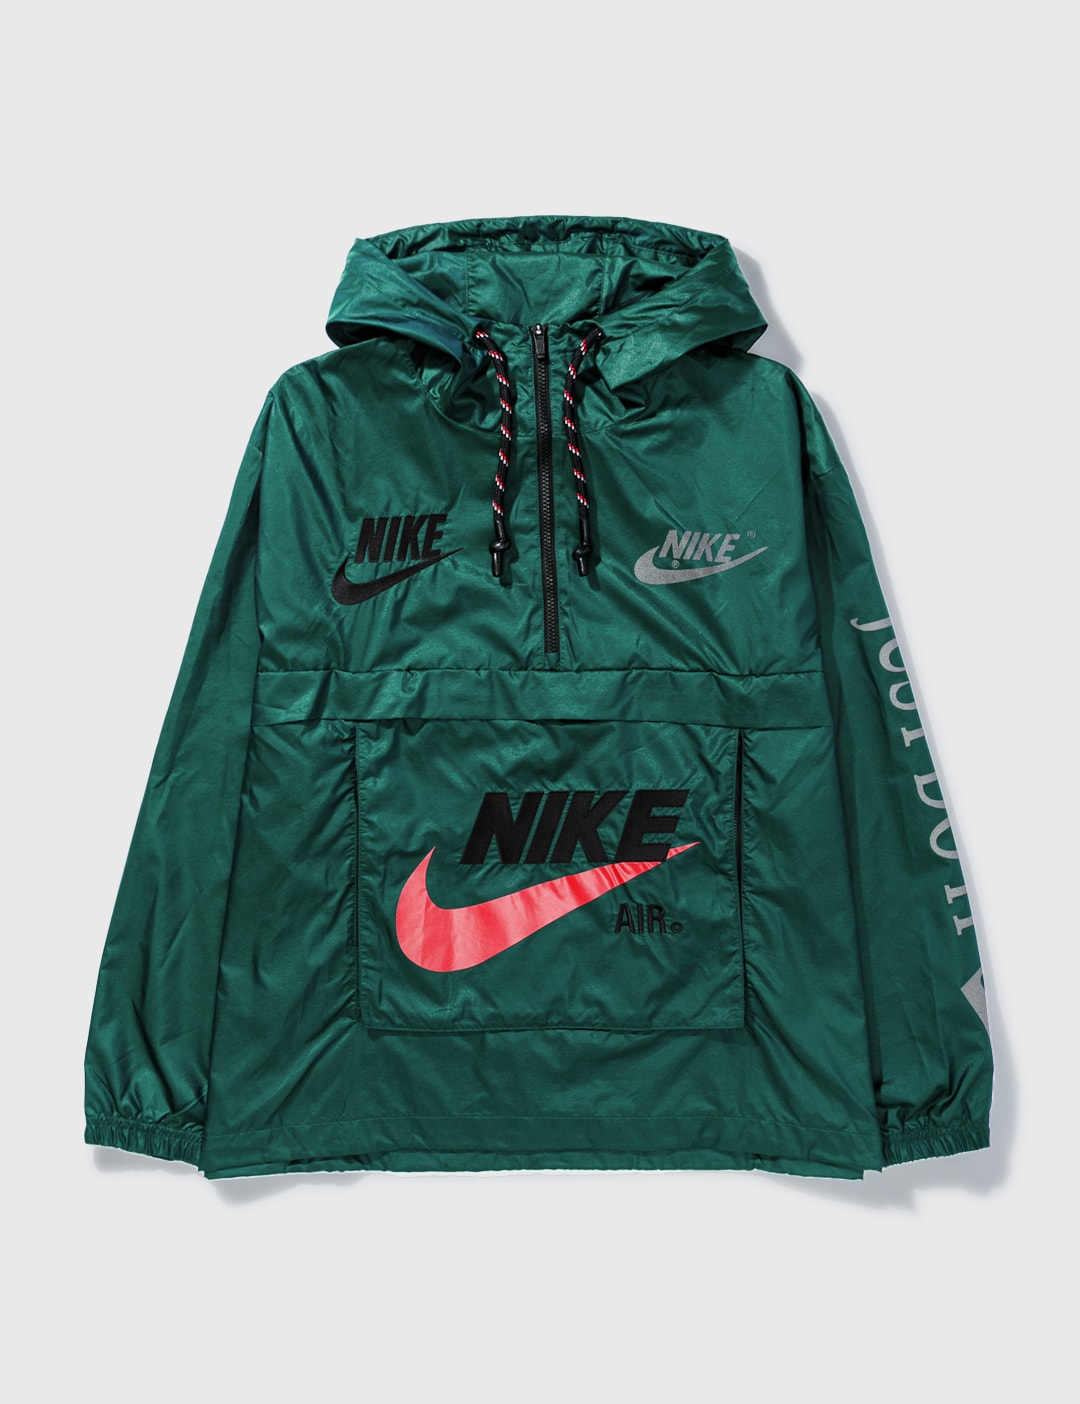 Nike - Nike x Cactus Plant Fea Market Zip Jacket | HBX Globally Curated Fashion and Lifestyle by Hypebeast